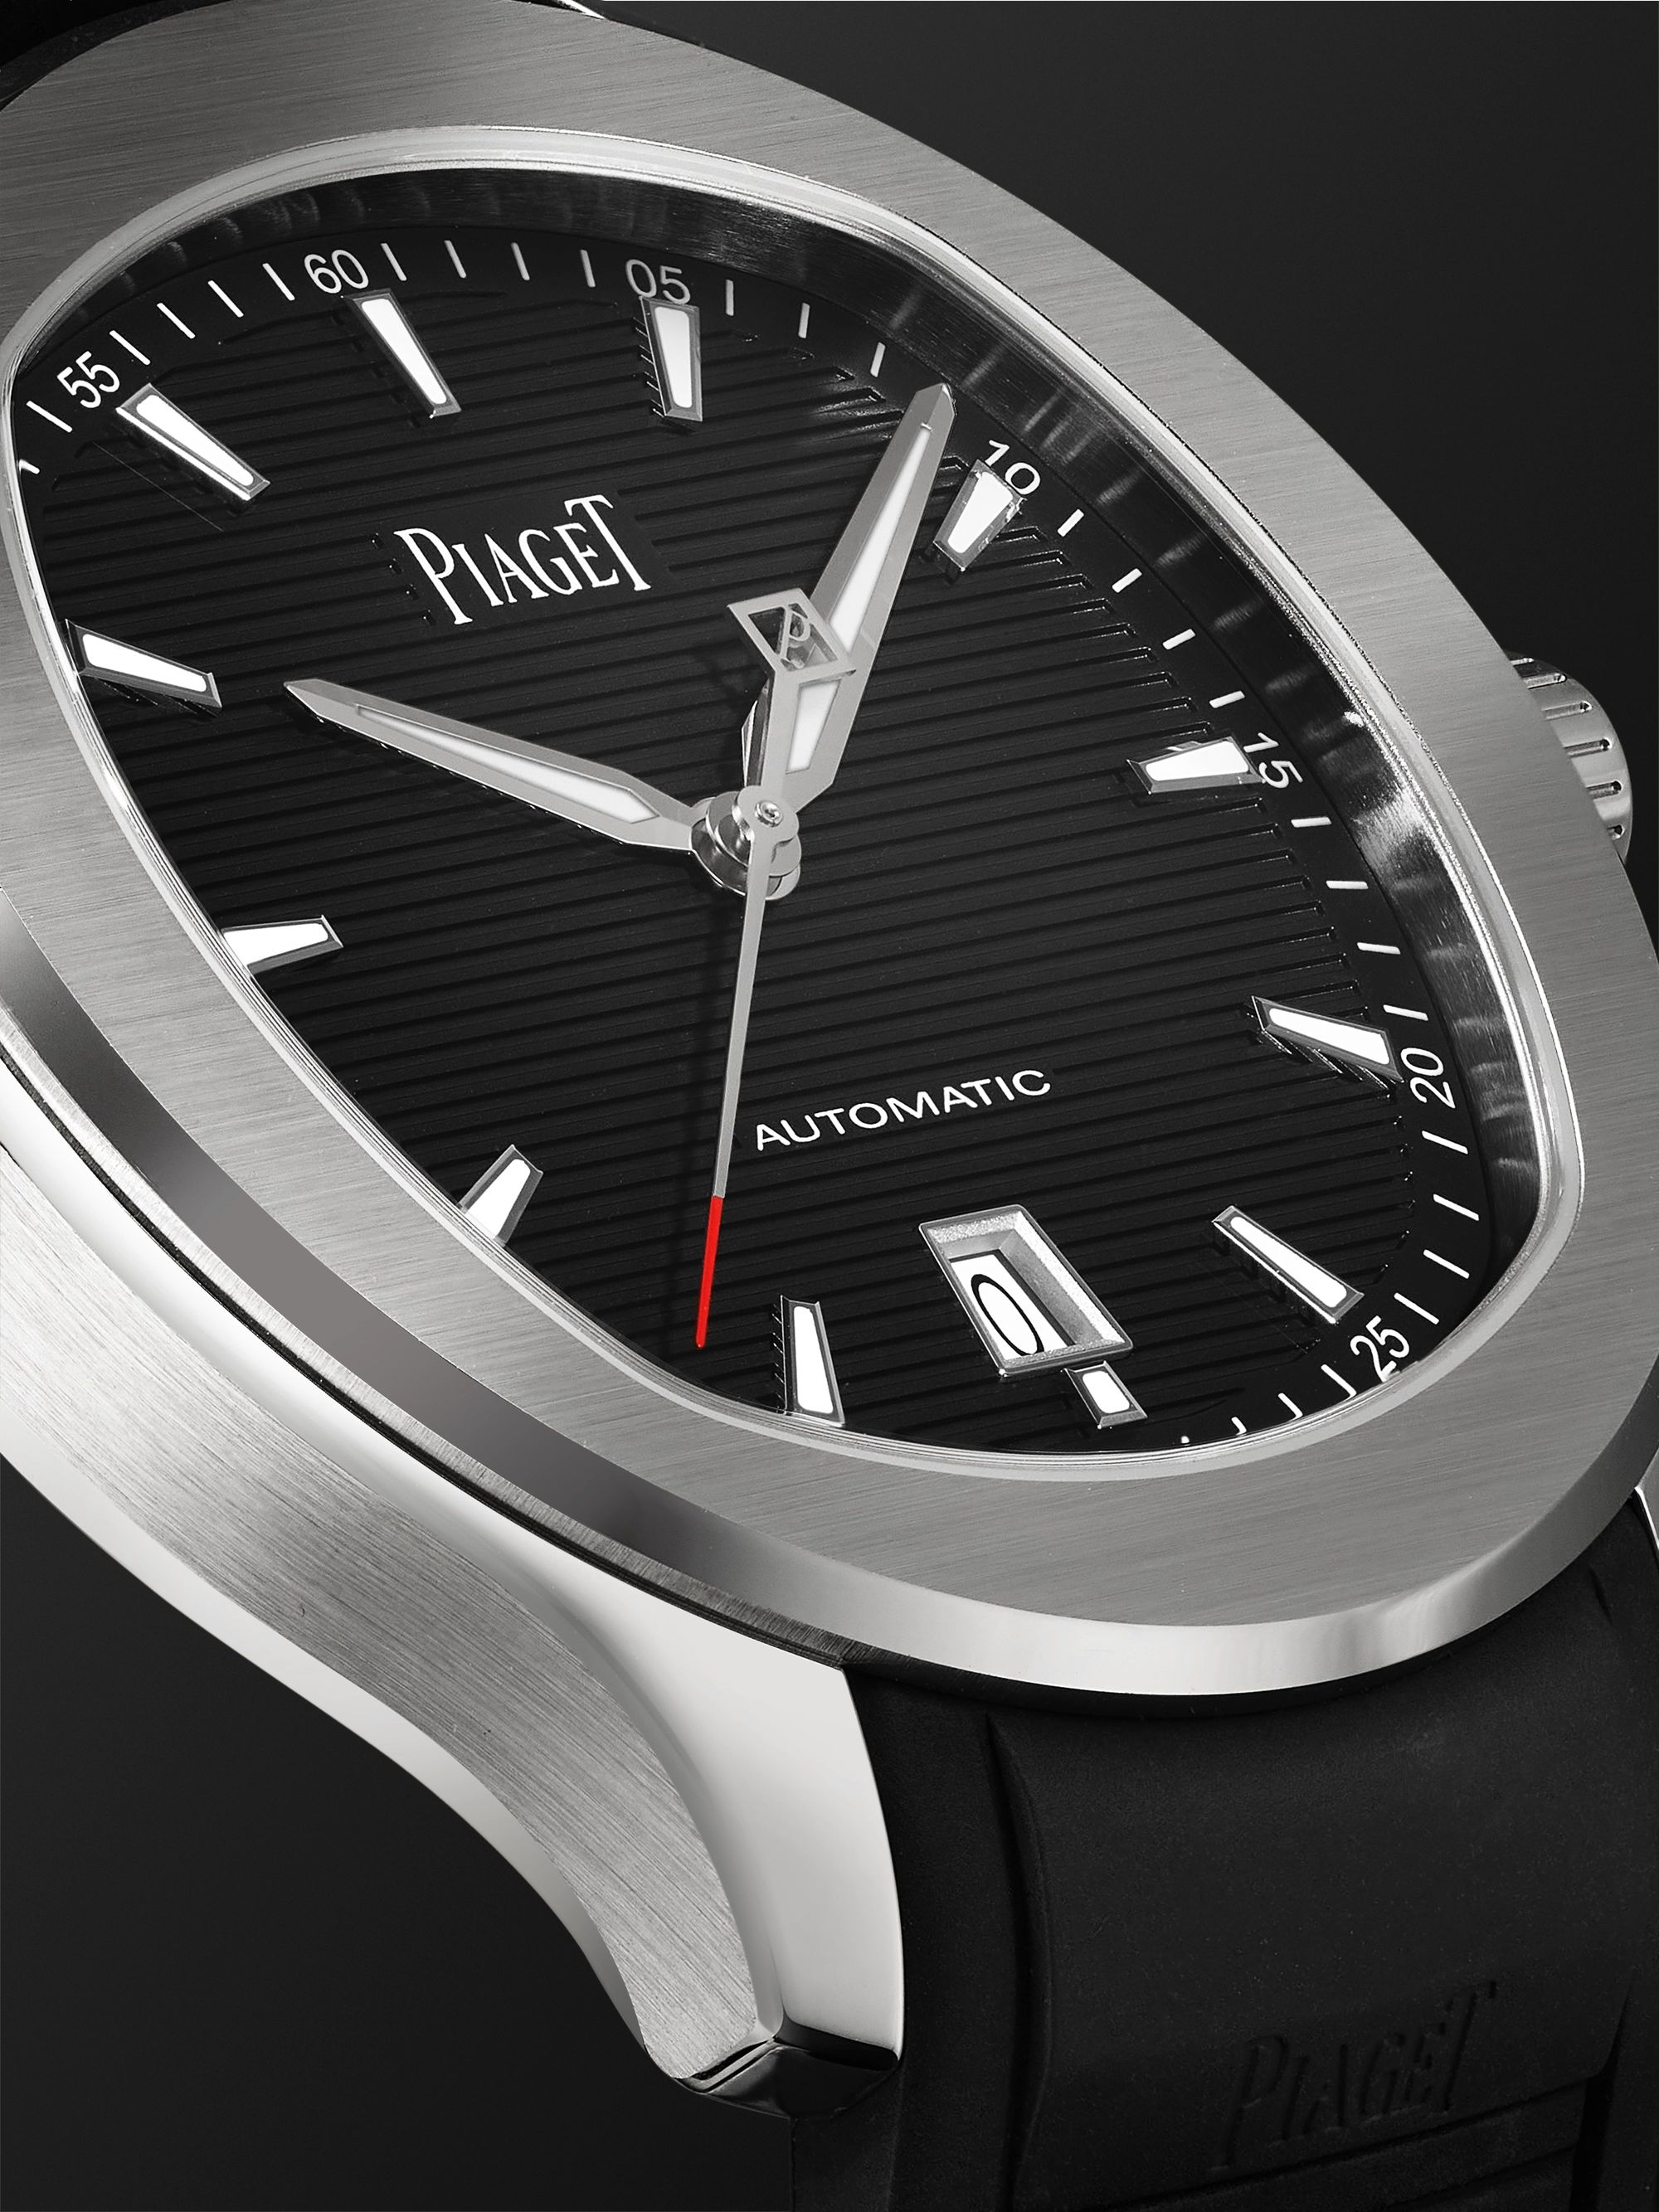 PIAGET Piaget Polo Date Automatic 42mm Stainless Steel and Rubber Watch, Ref. No. G0A47014